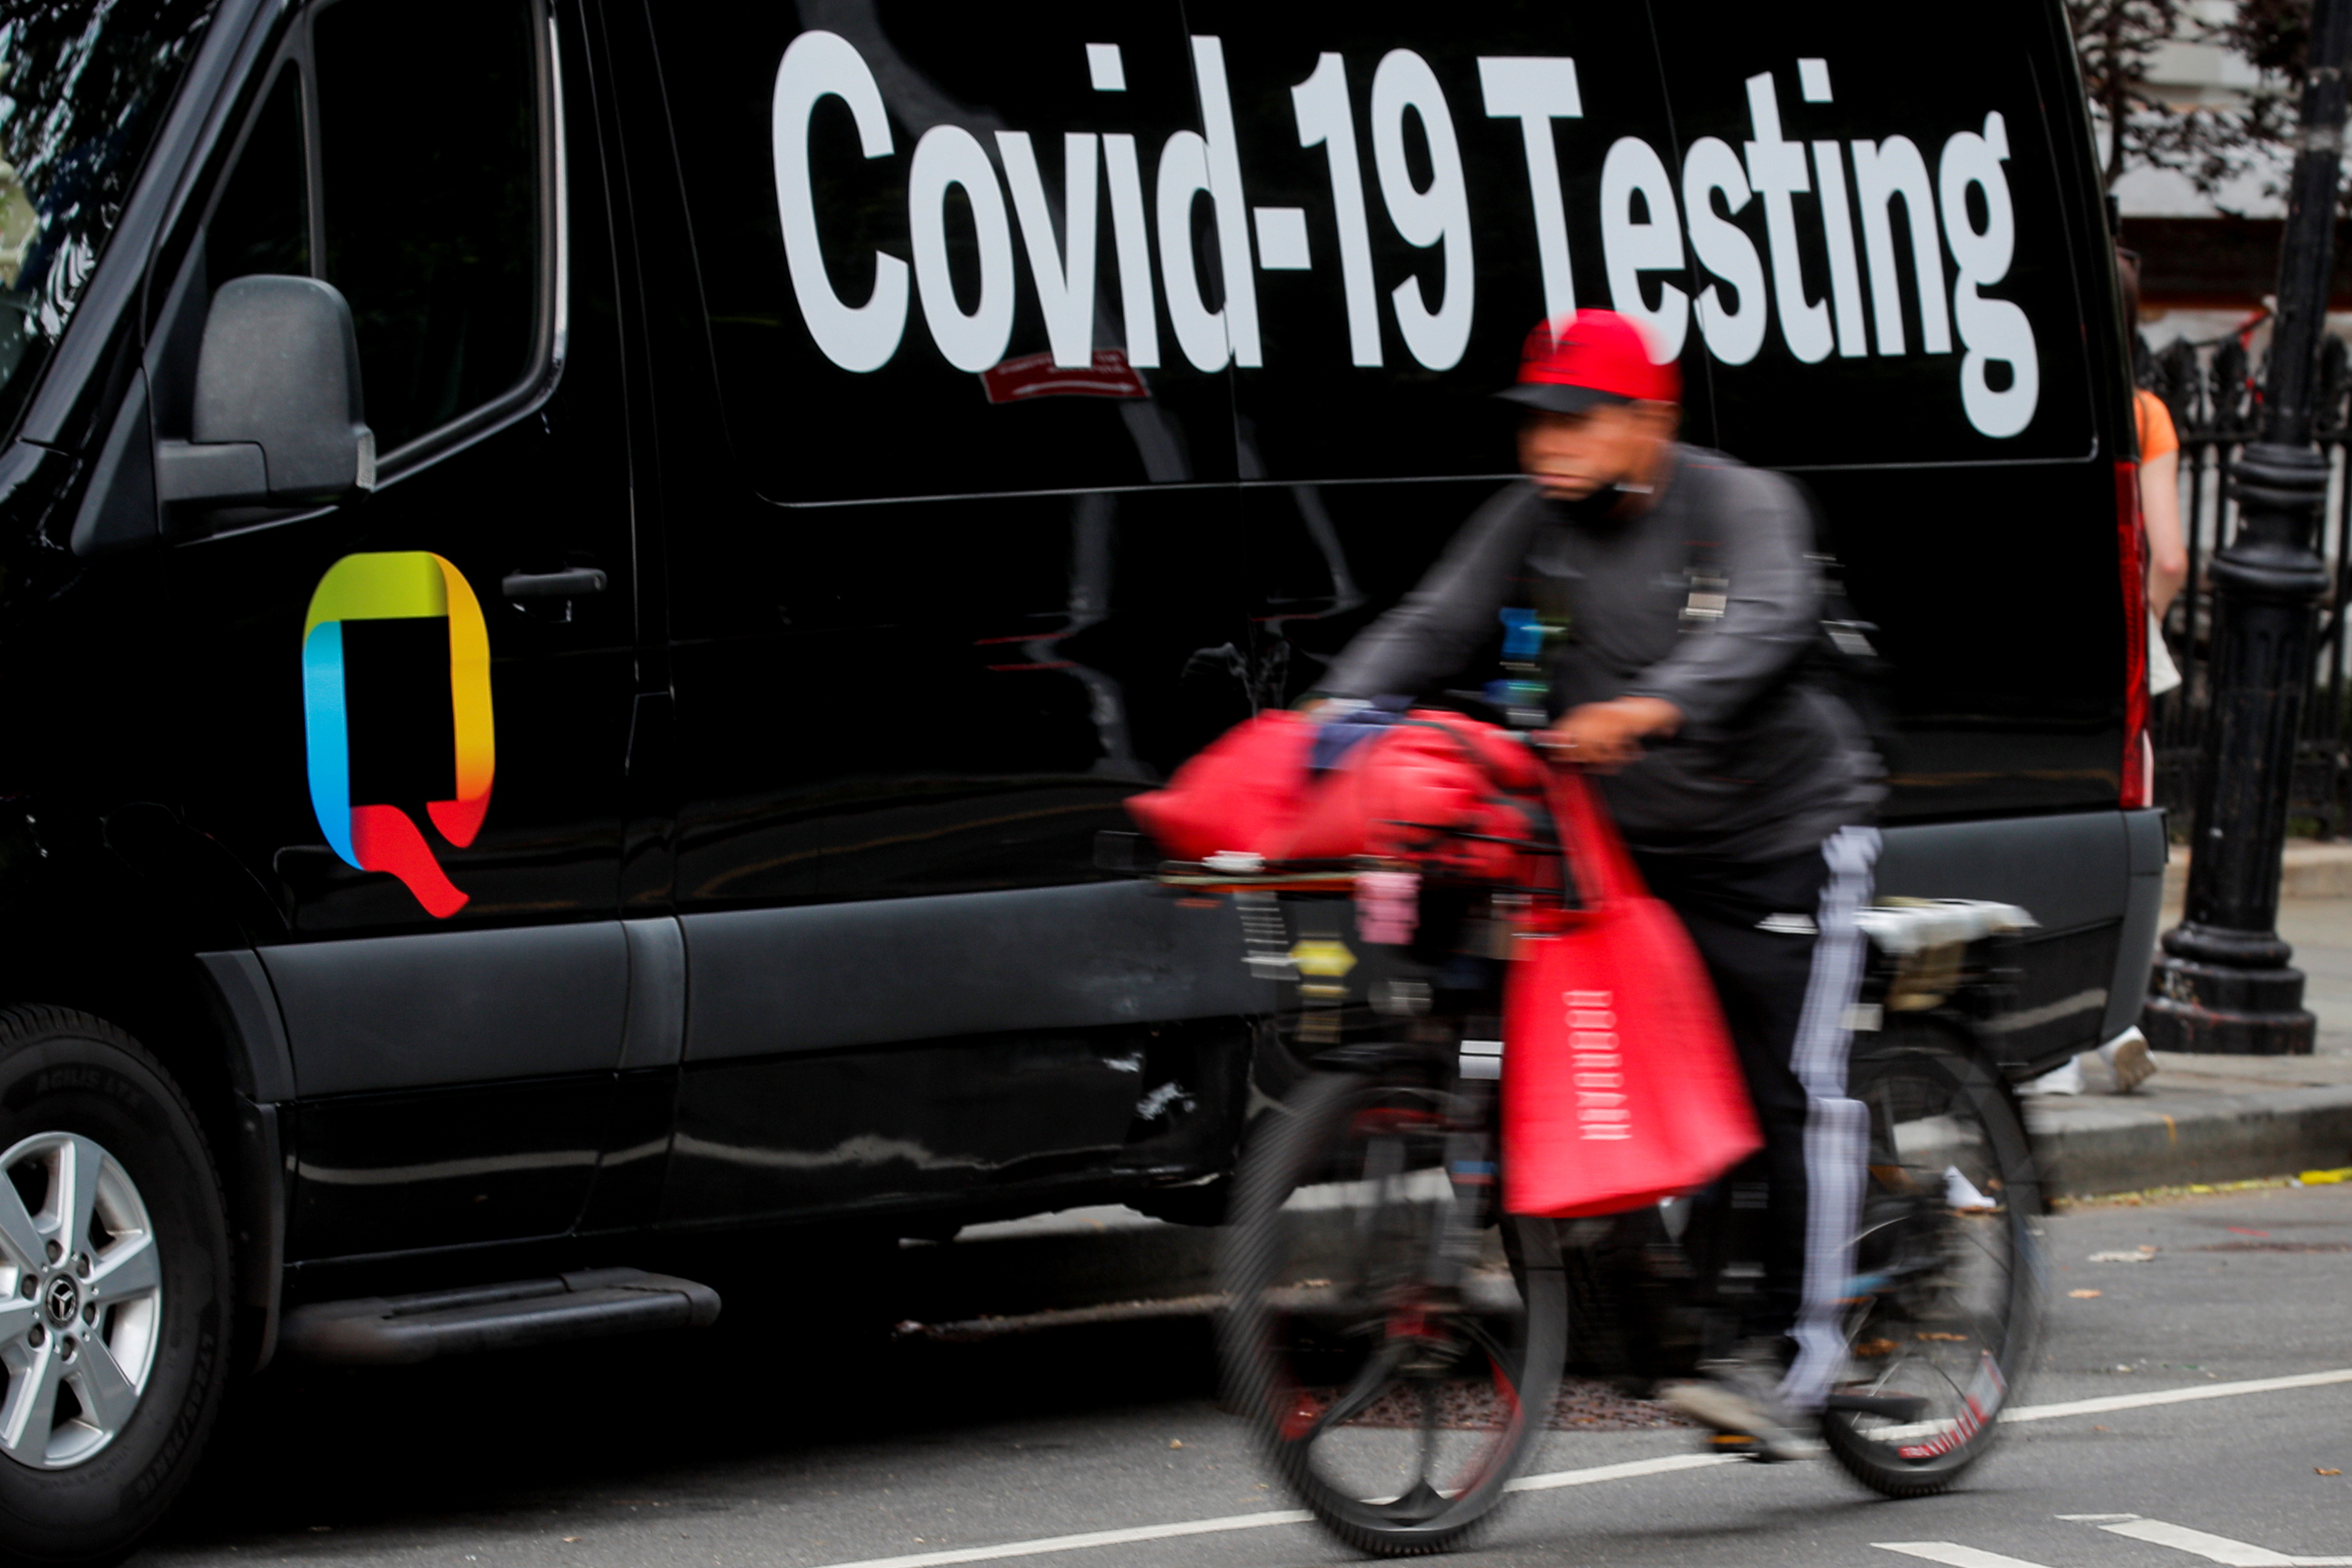 A food delivery person passes by a COVID-19 mobile testing van in New York